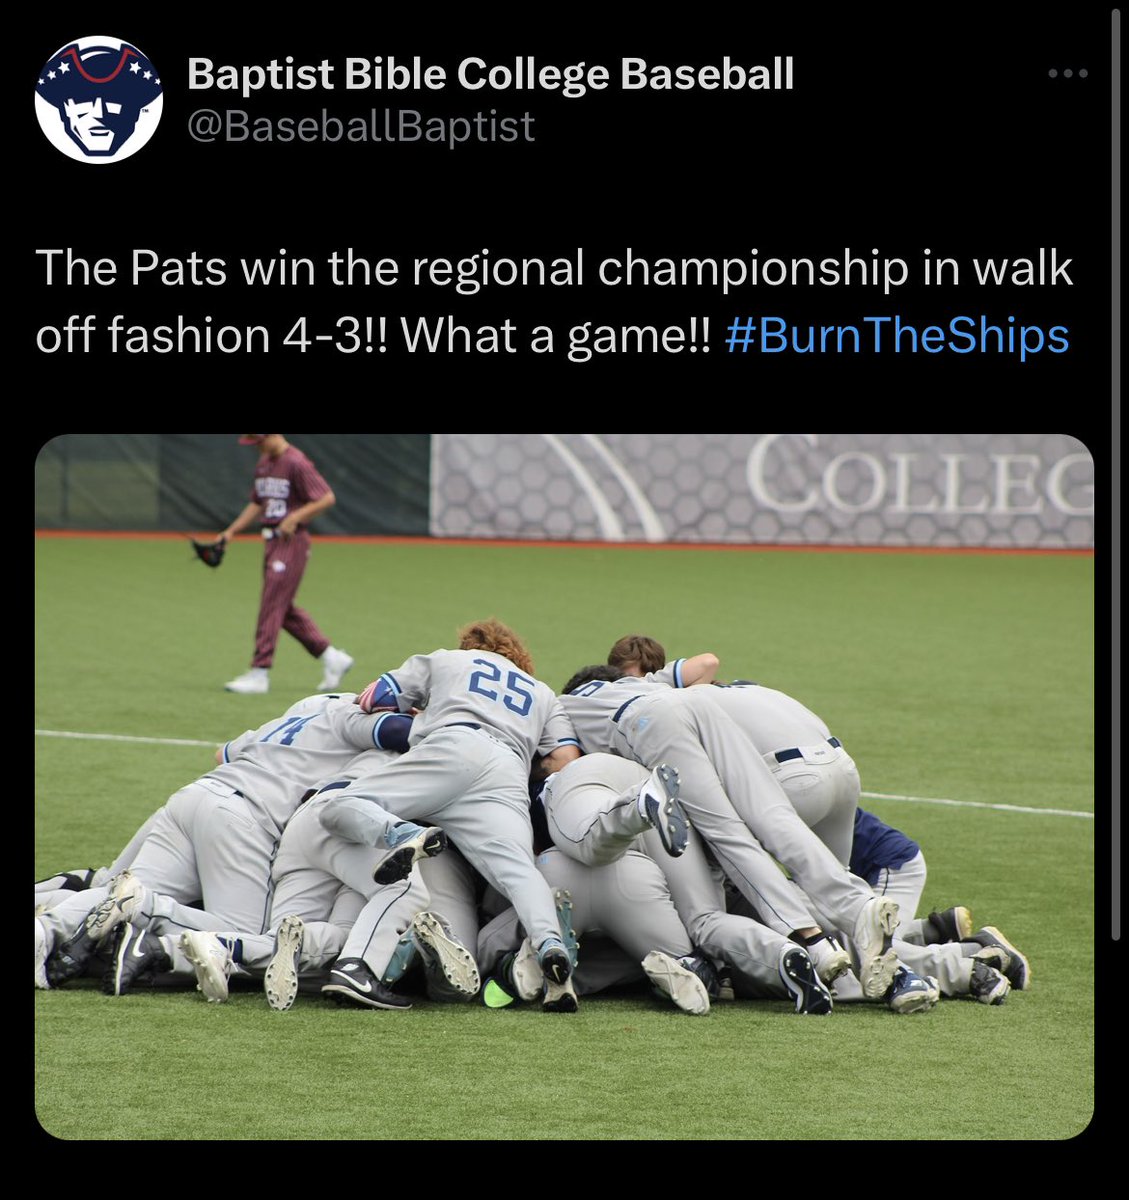 Congratulations to @BaseballBaptist on winning the regional championship and getting to go to the World Series! Well deserved. #LetsWork